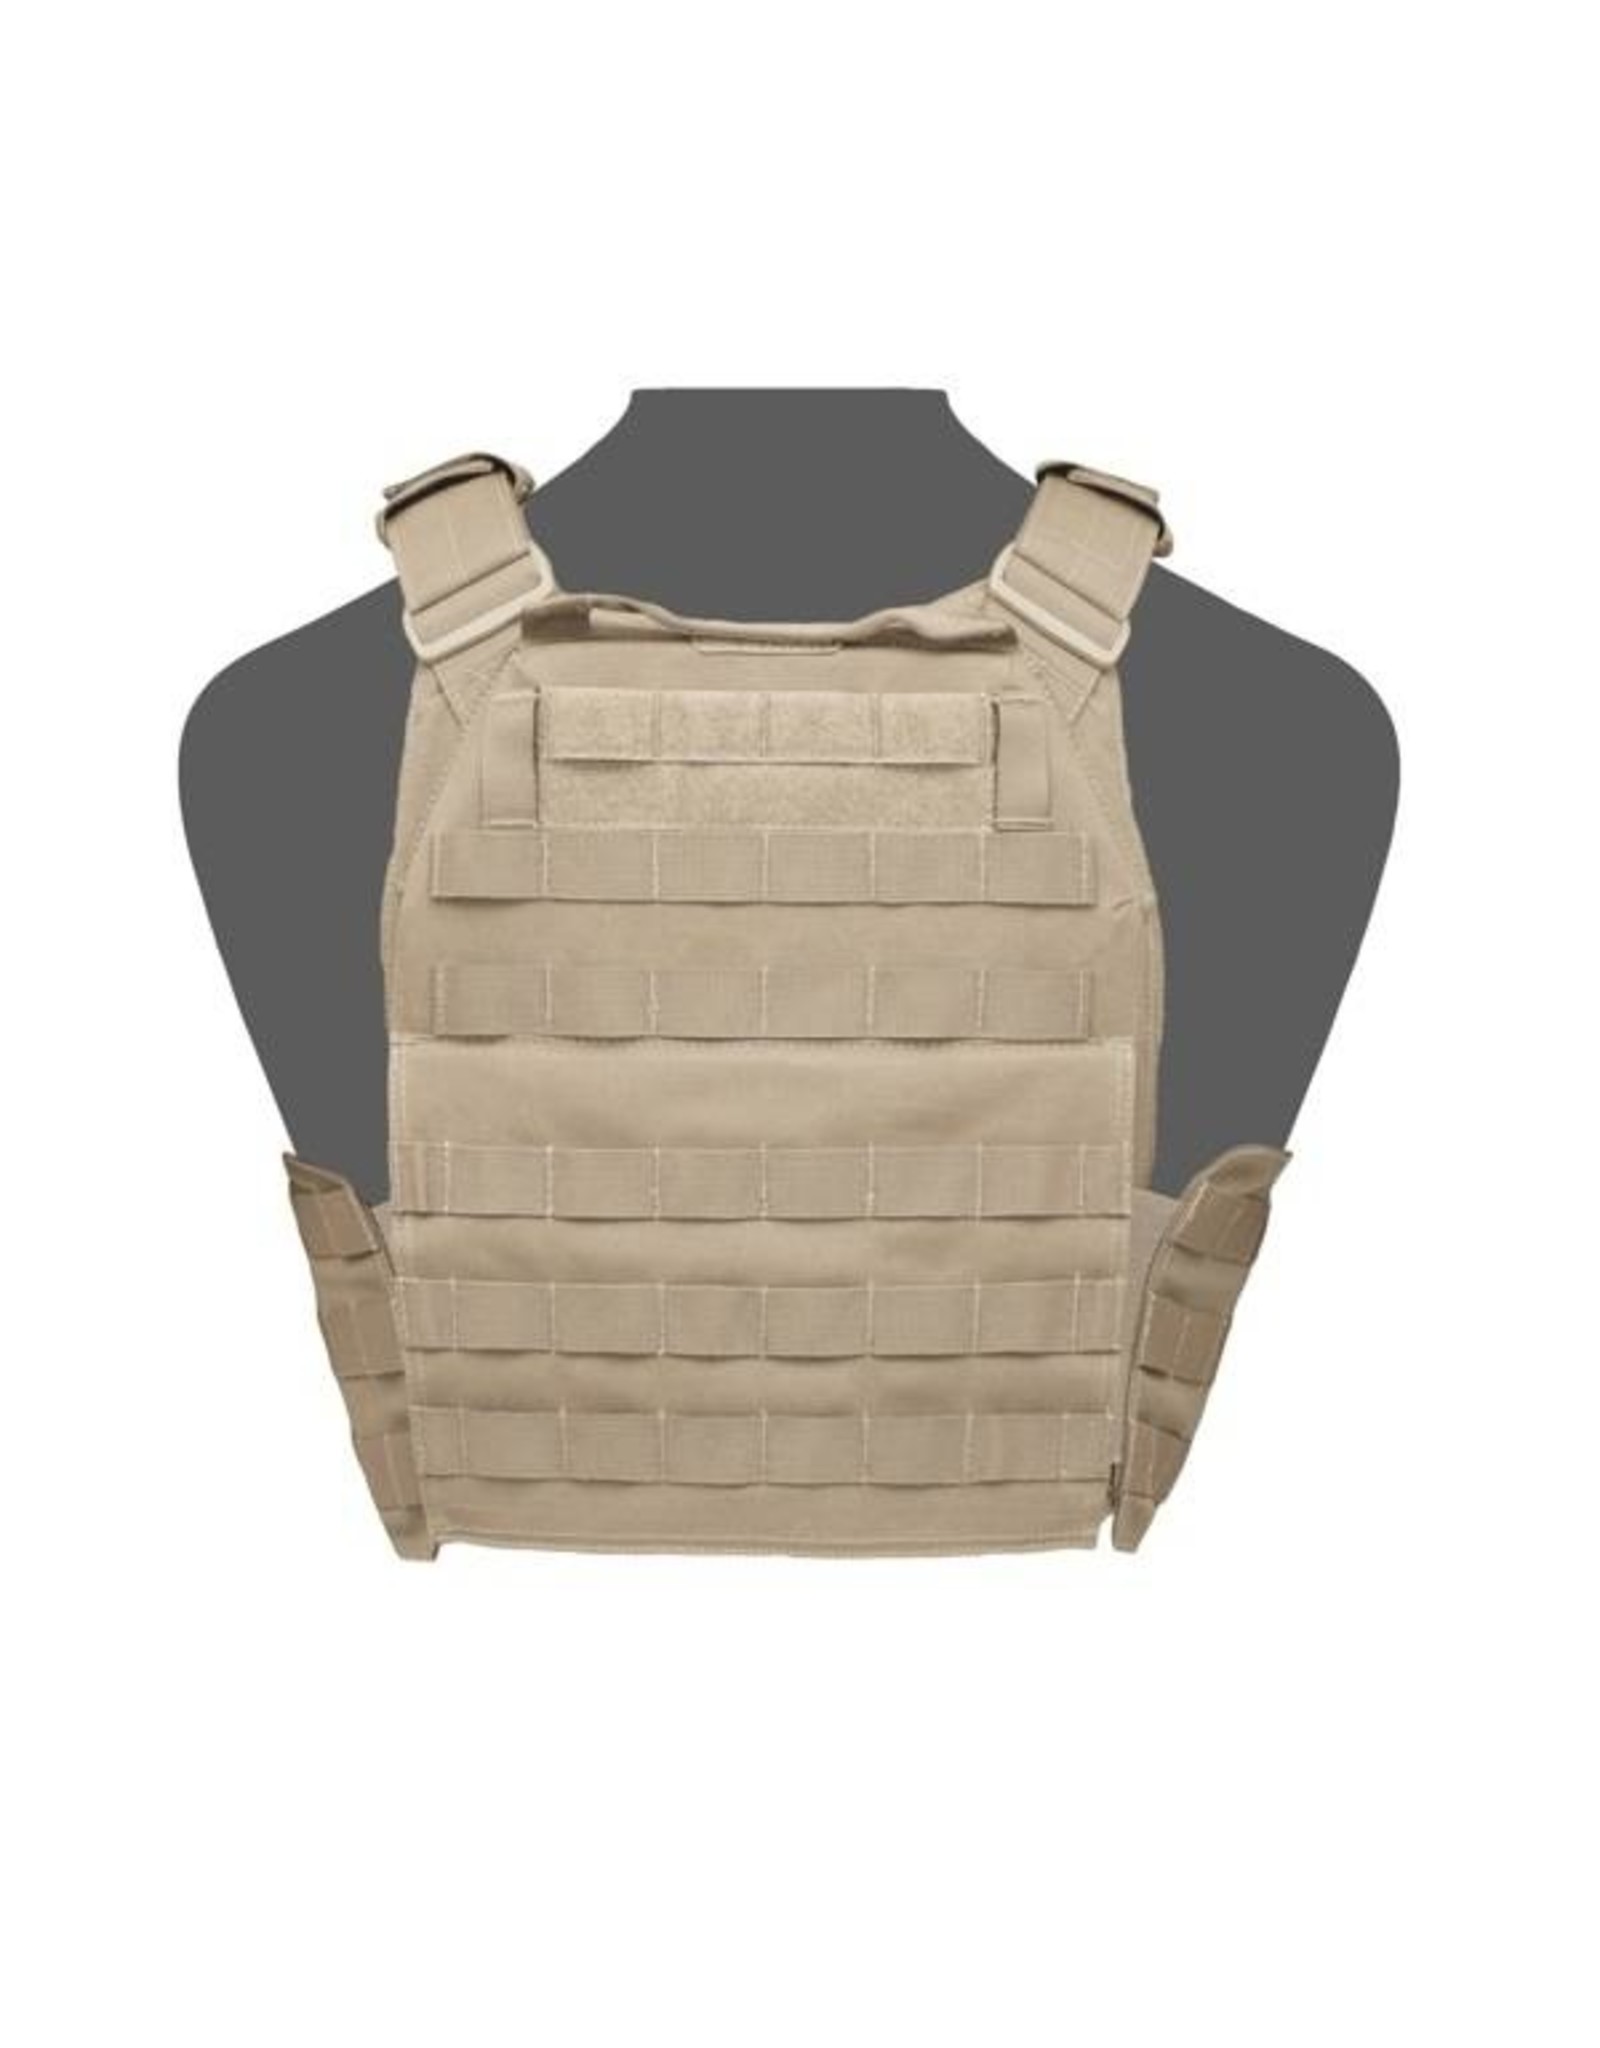 Warrior DCS Special Forces Plate Carrier Base - Coyote Tan